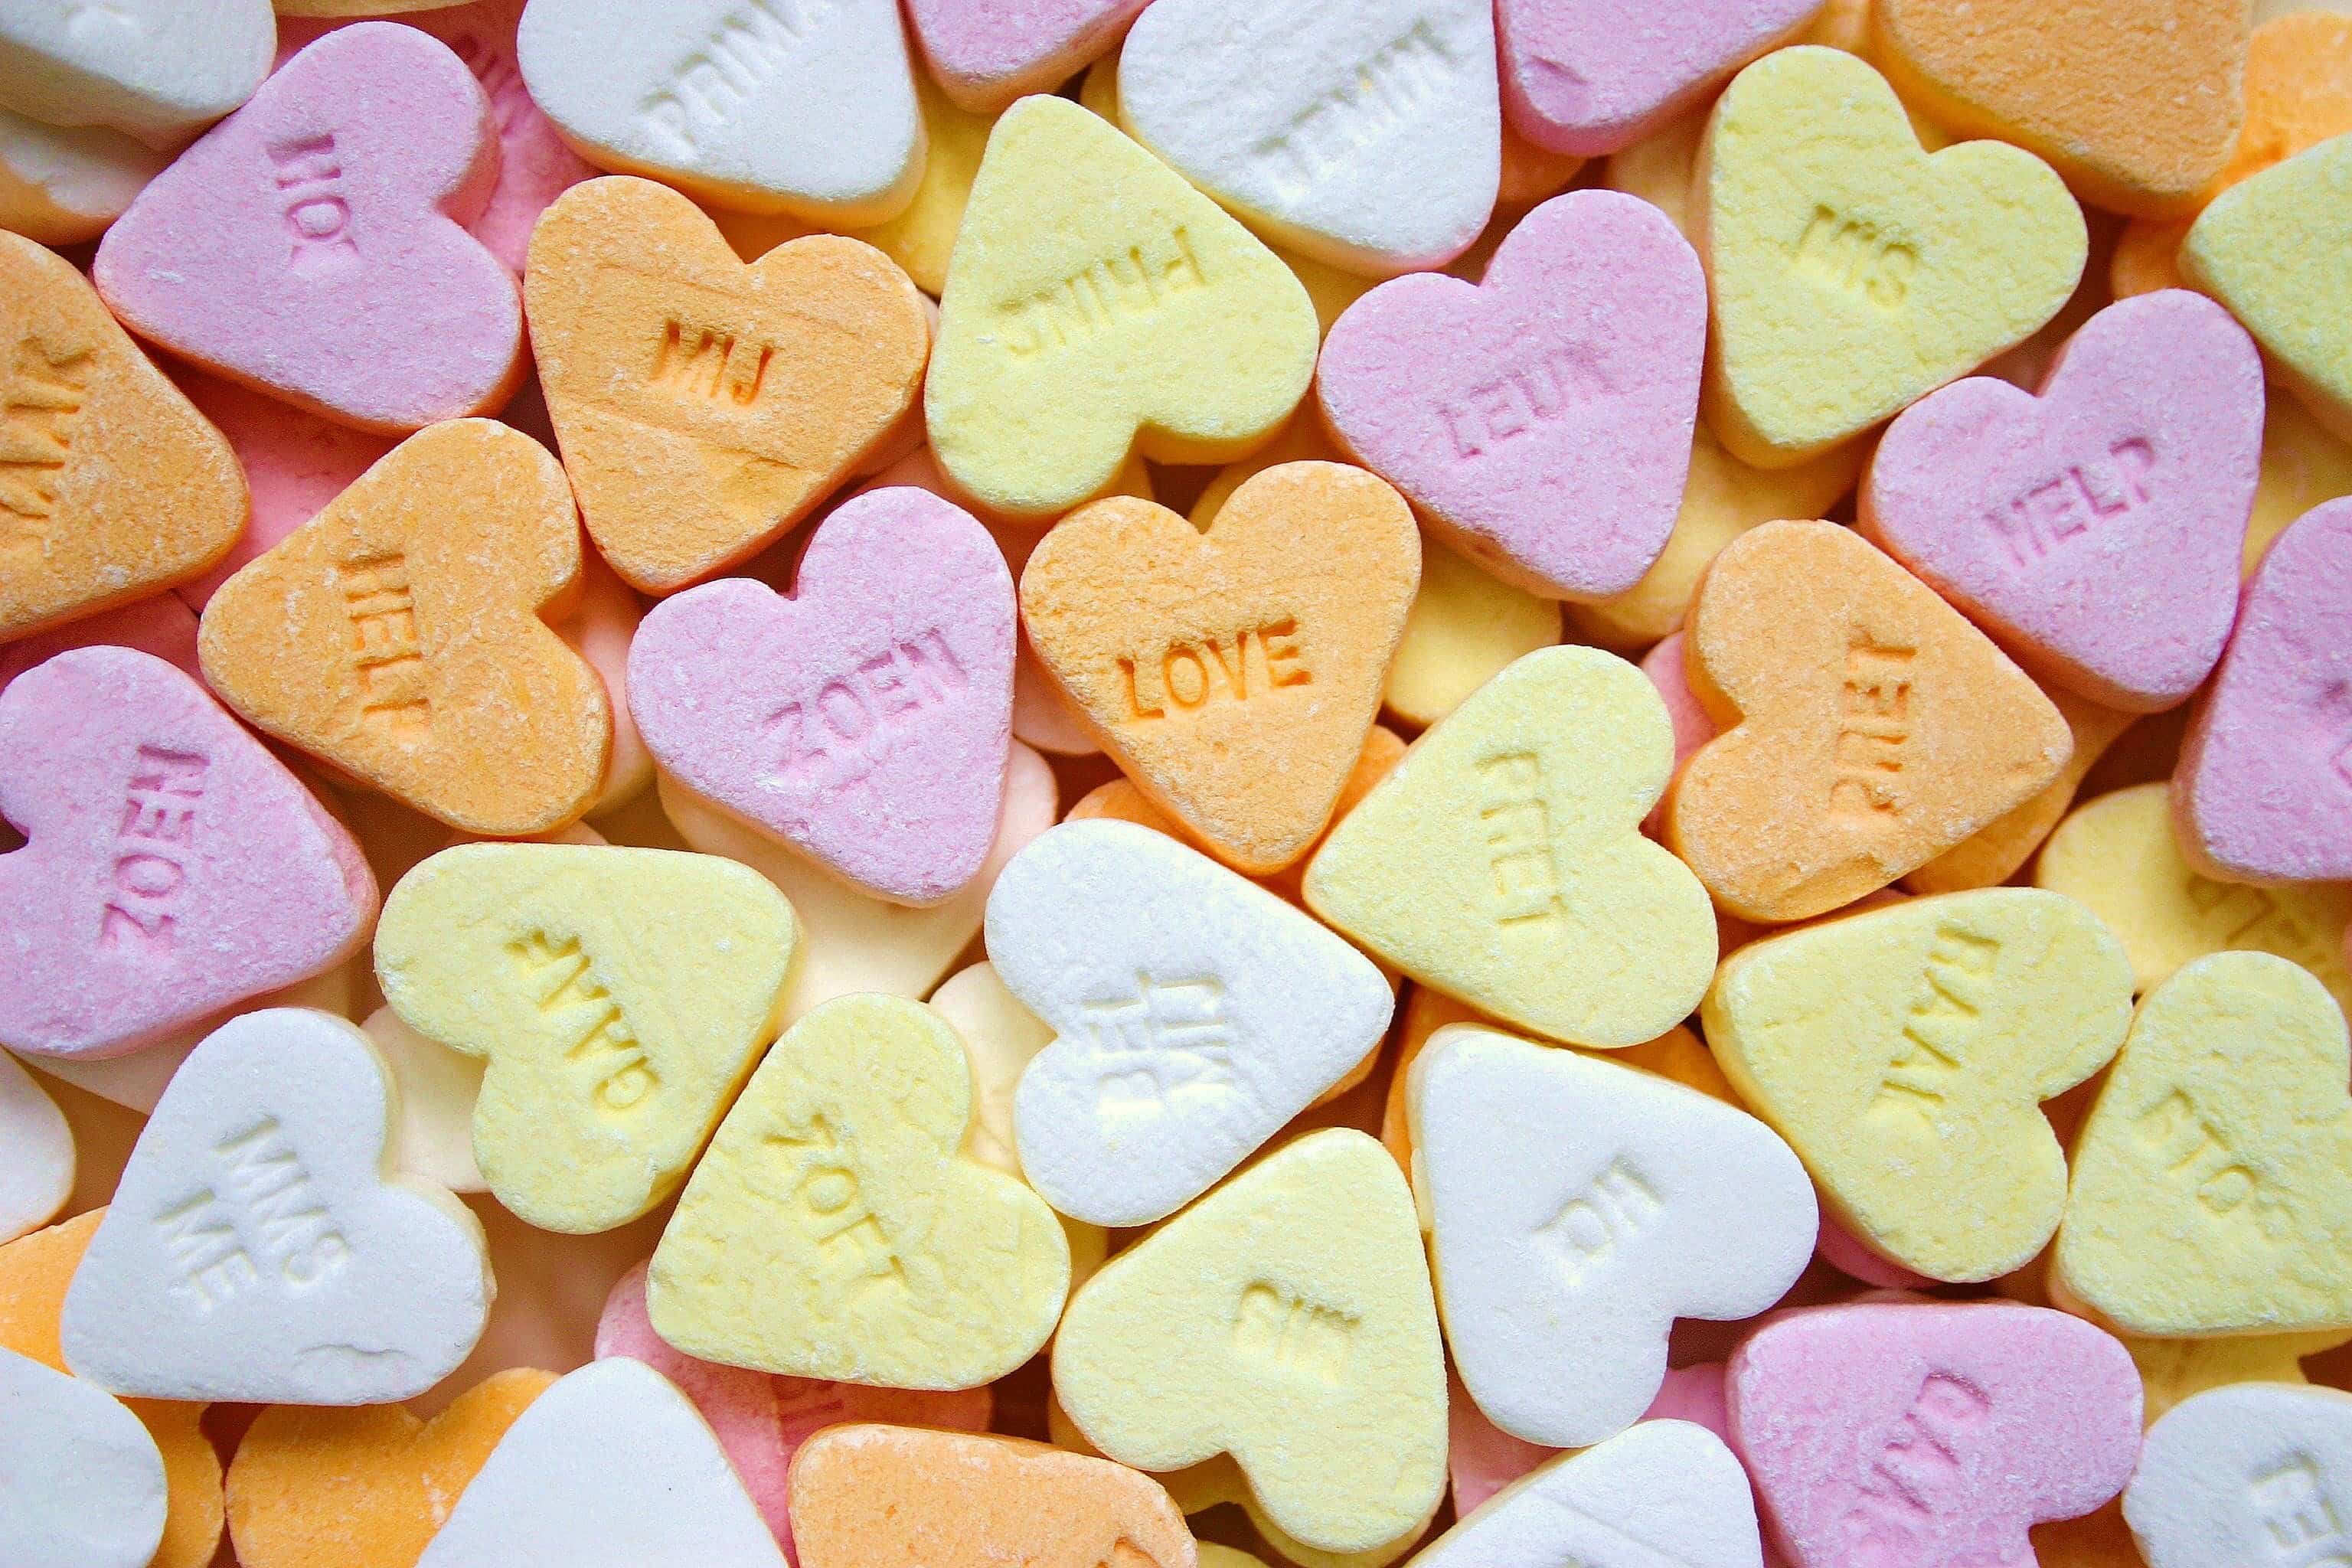 A selection of heart candies  with romantic messages on them